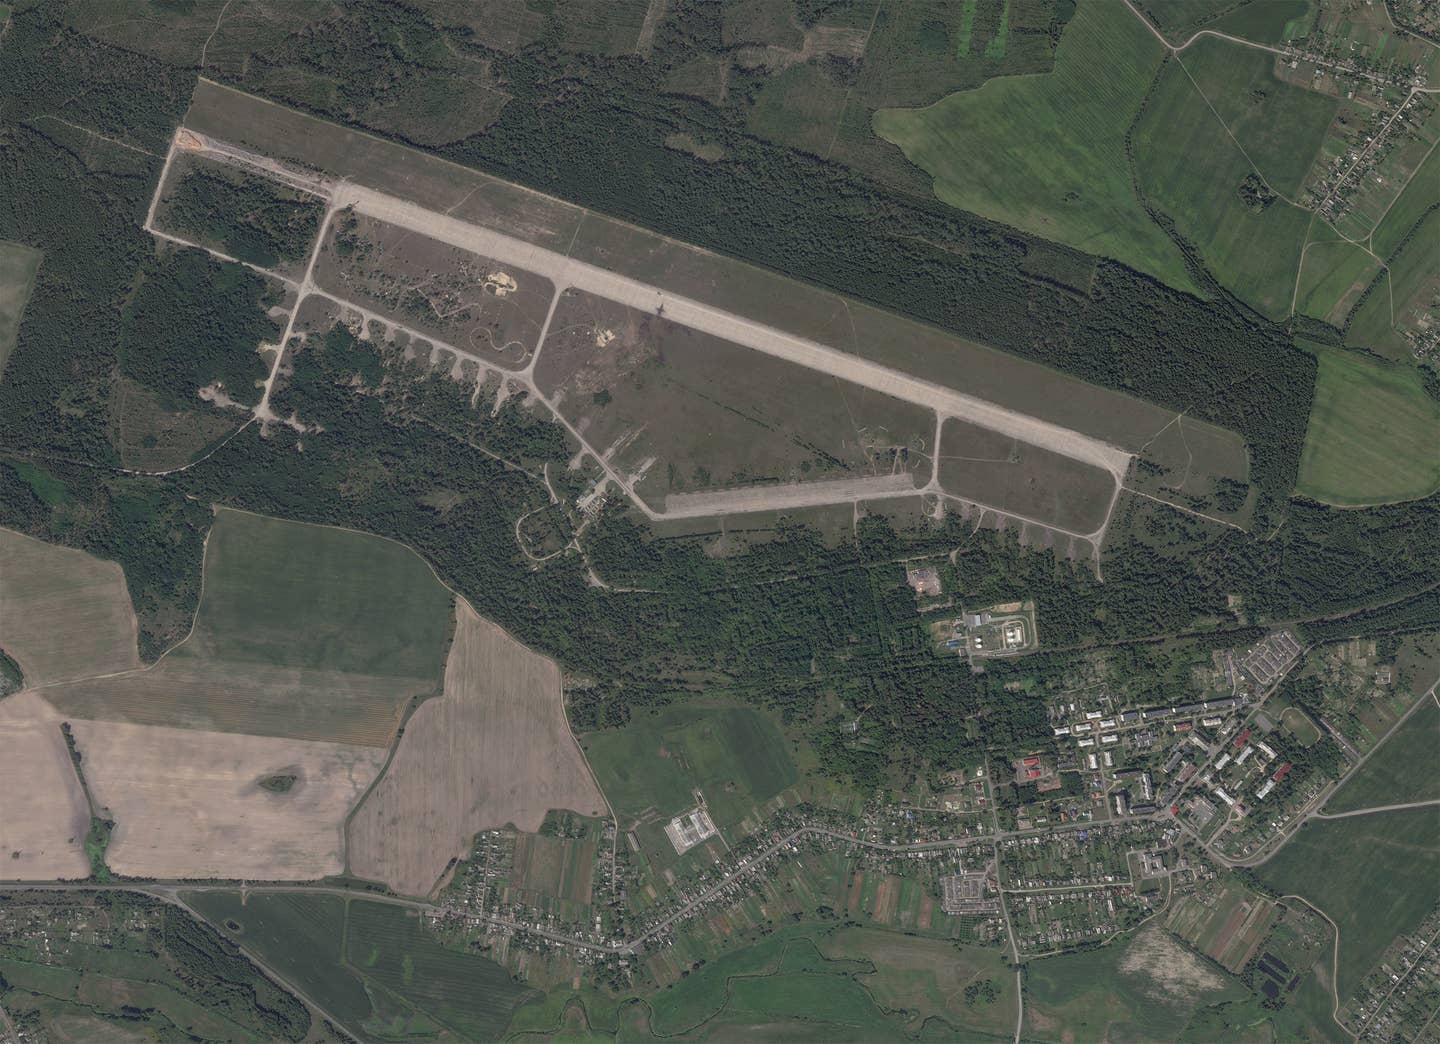 Ziabrovka Airbase. <em>PHOTO © 2022 PLANET LABS INC. ALL RIGHTS RESERVED. REPRINTED BY PERMISSION</em>